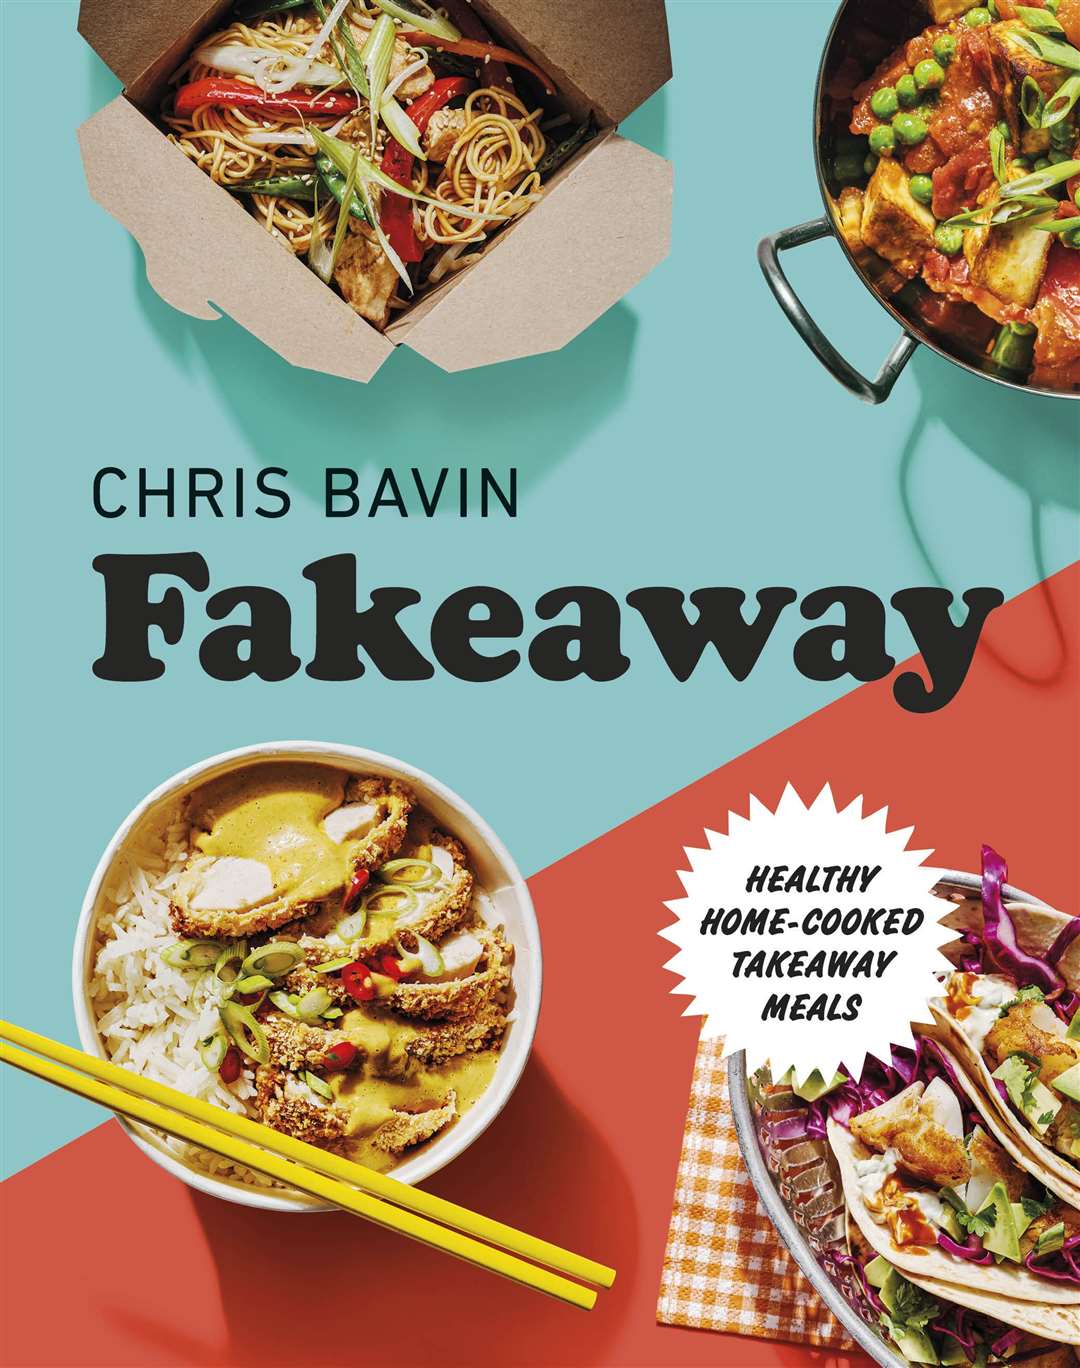 Fakeaway: Healthy Home-cooked Takeaway Meals by Chris Bavin, photography by Liz and Max Haarala Hamilton, published by DK (DK.com), priced £14.99. Available now.